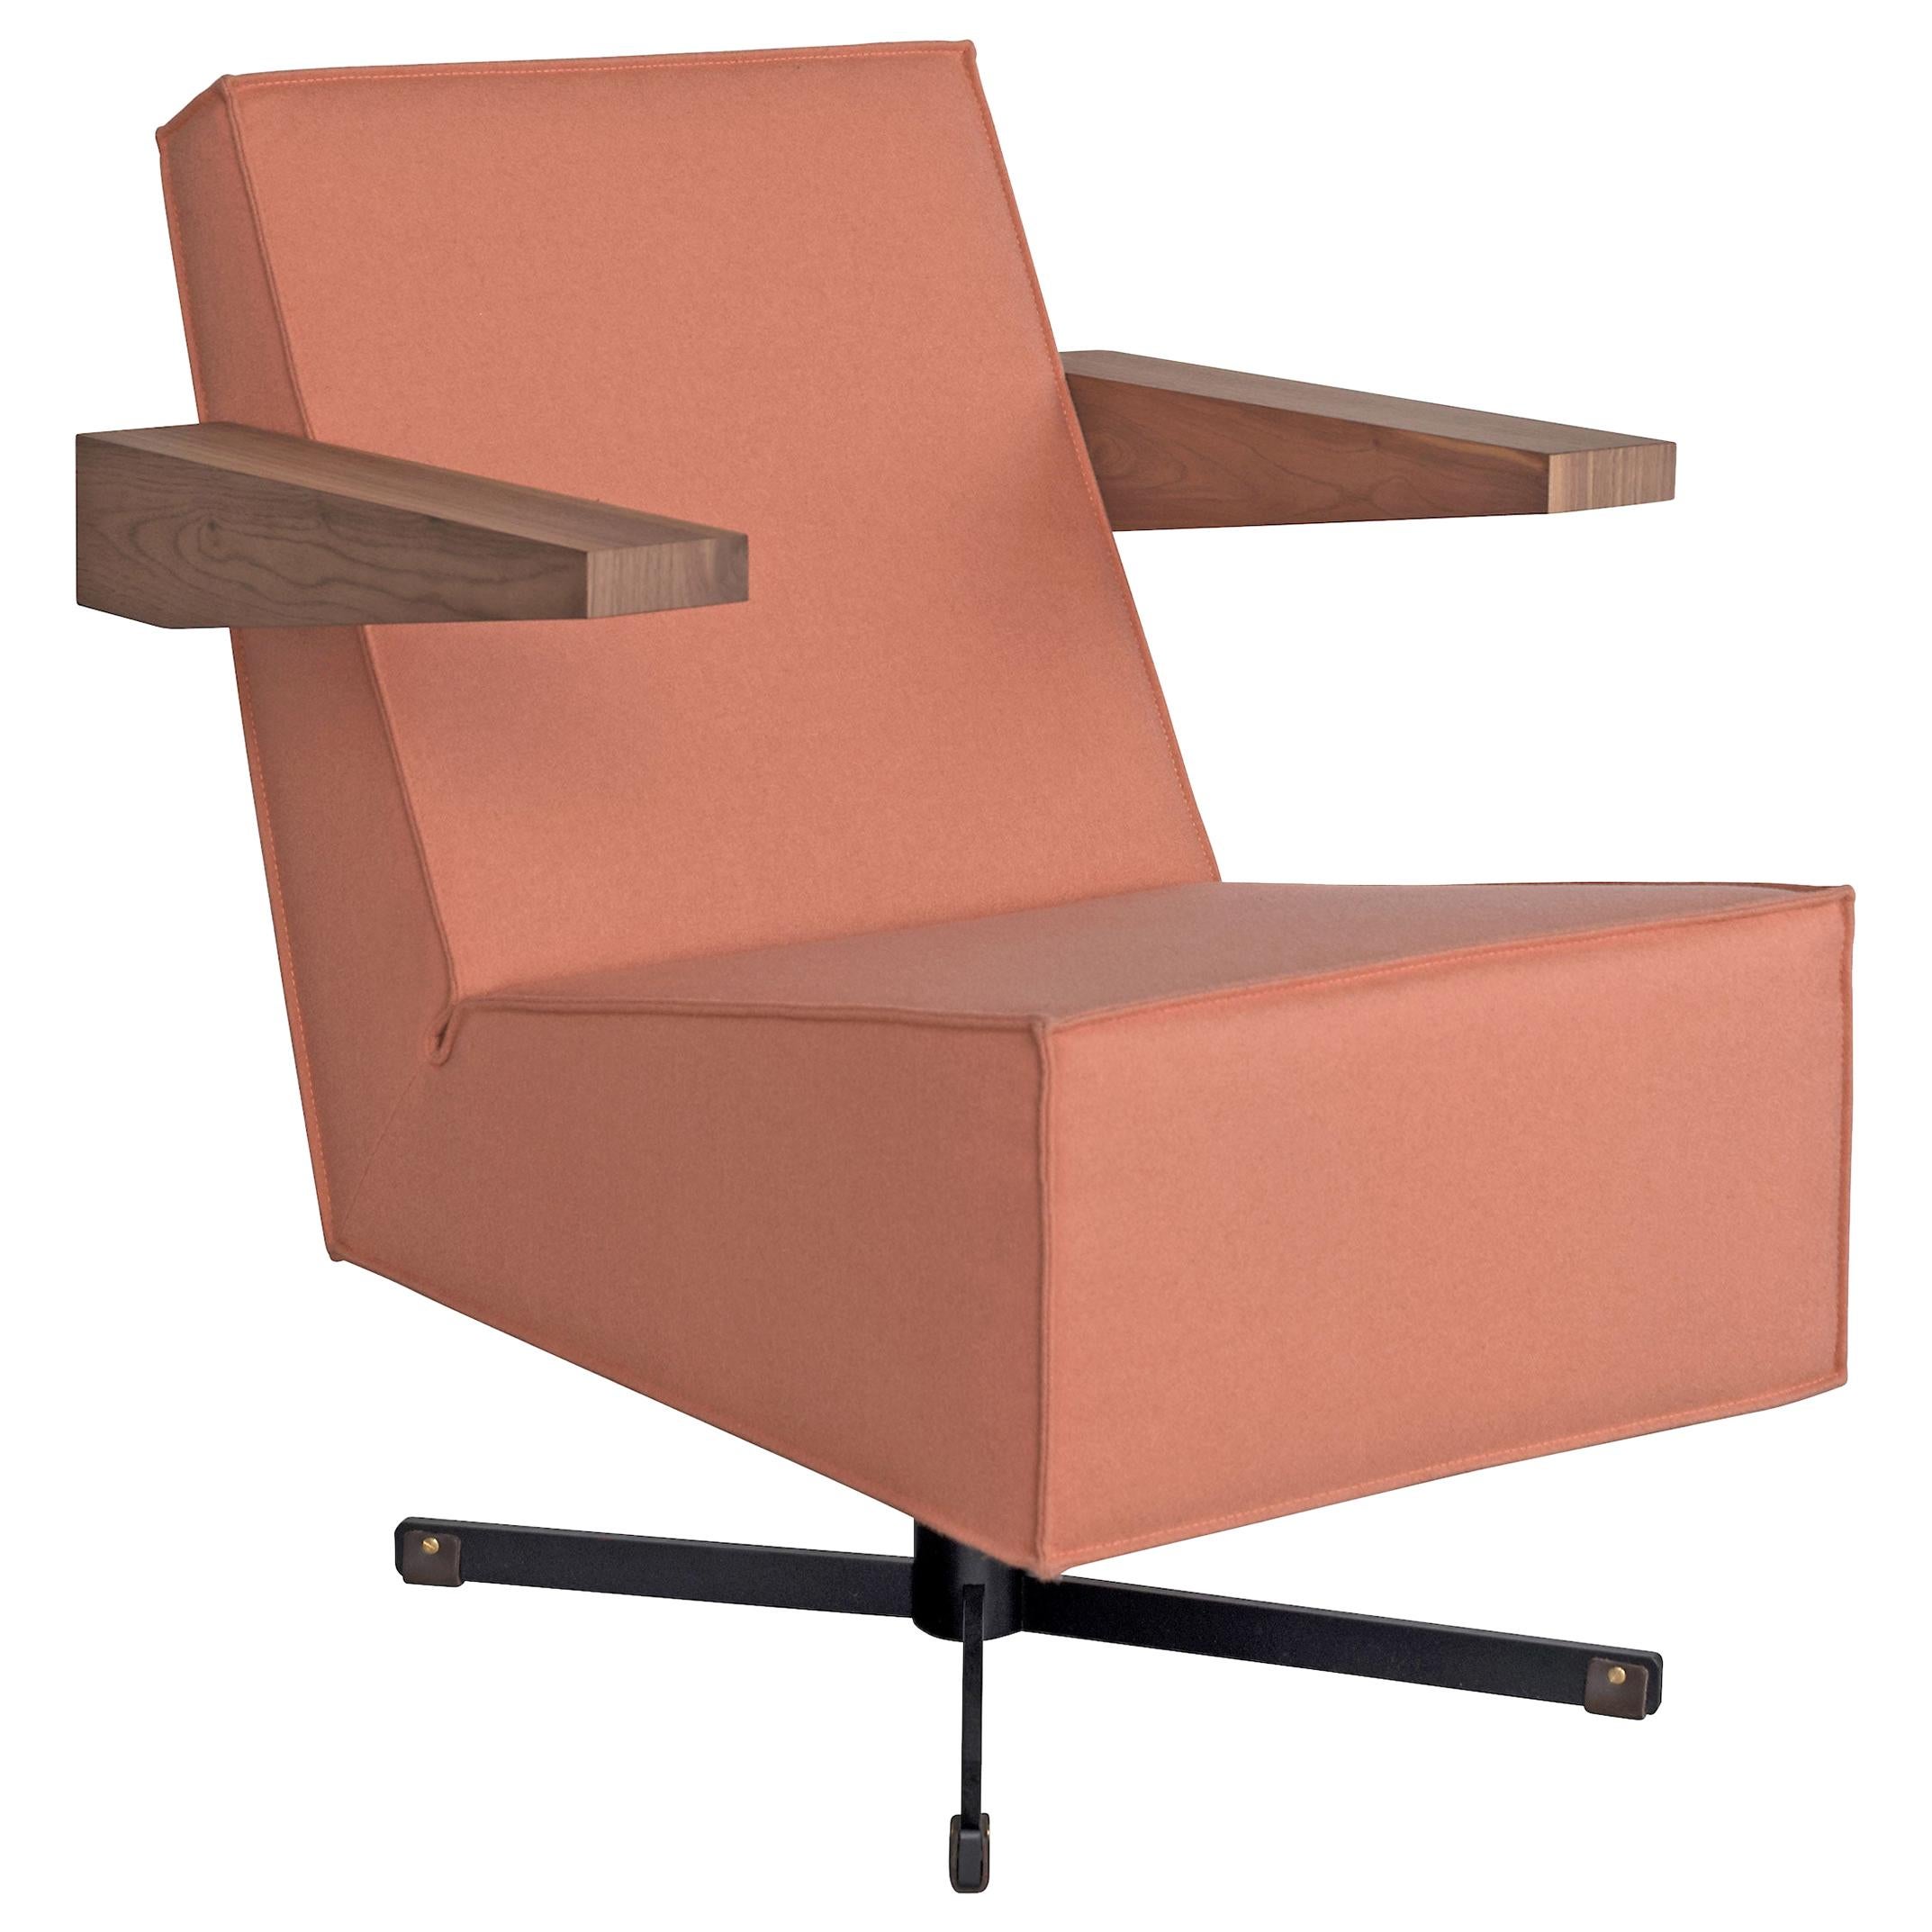 Press Room Chair in Coral Pink, Designed in 1958 by Gerrit Rietveld For Sale